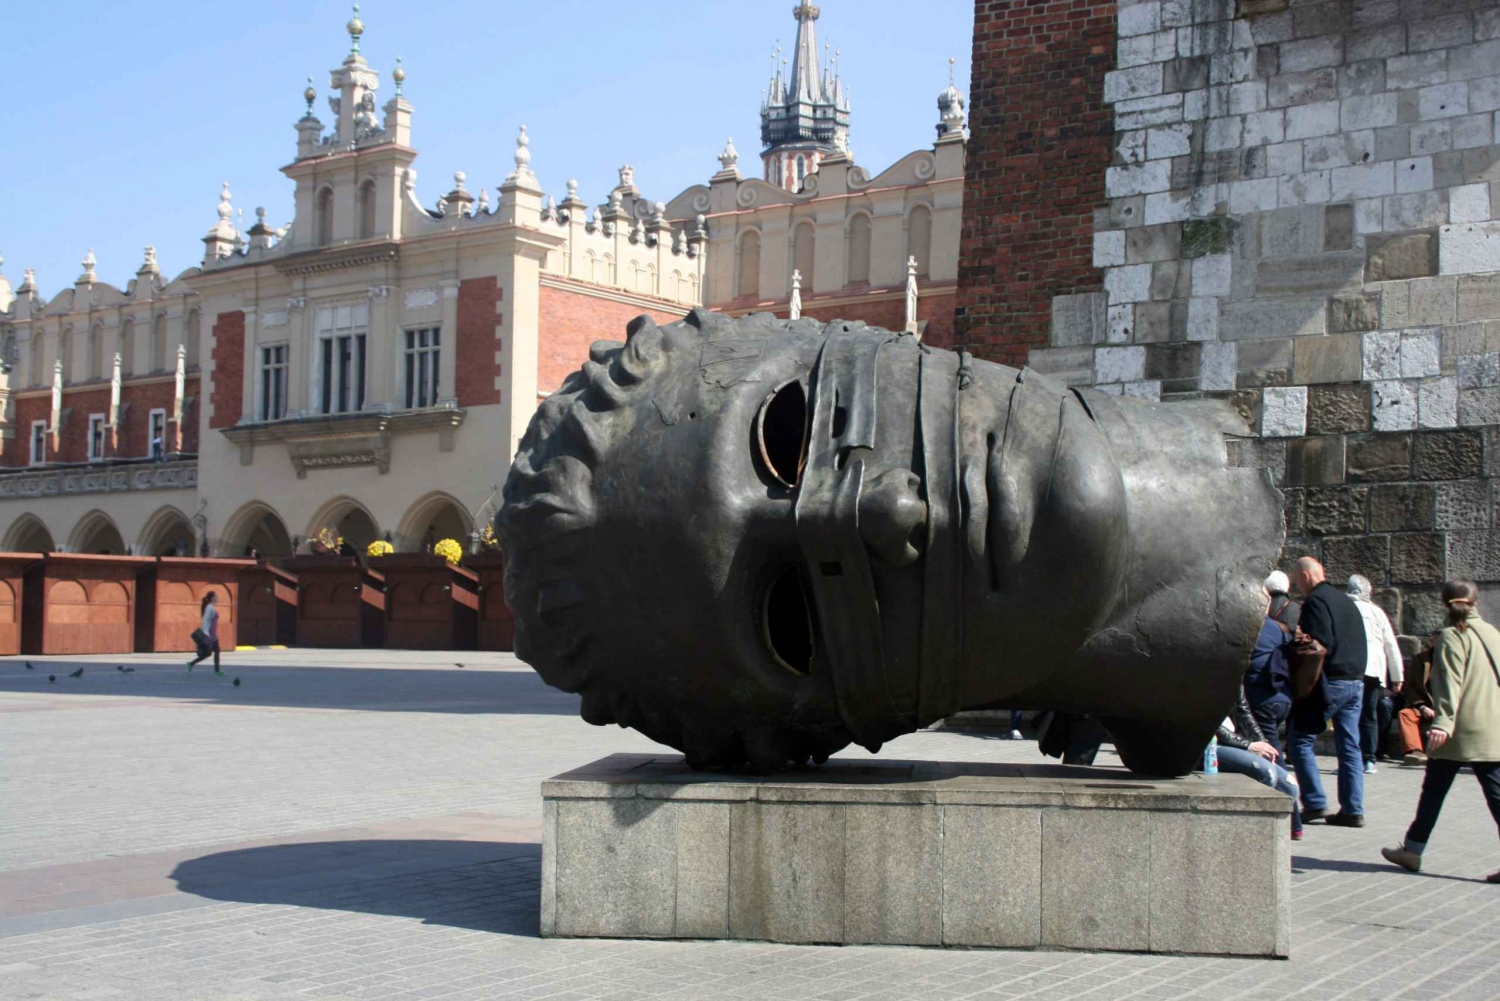 Krakow: Historic Old Town and Royal Castle Guided Tour